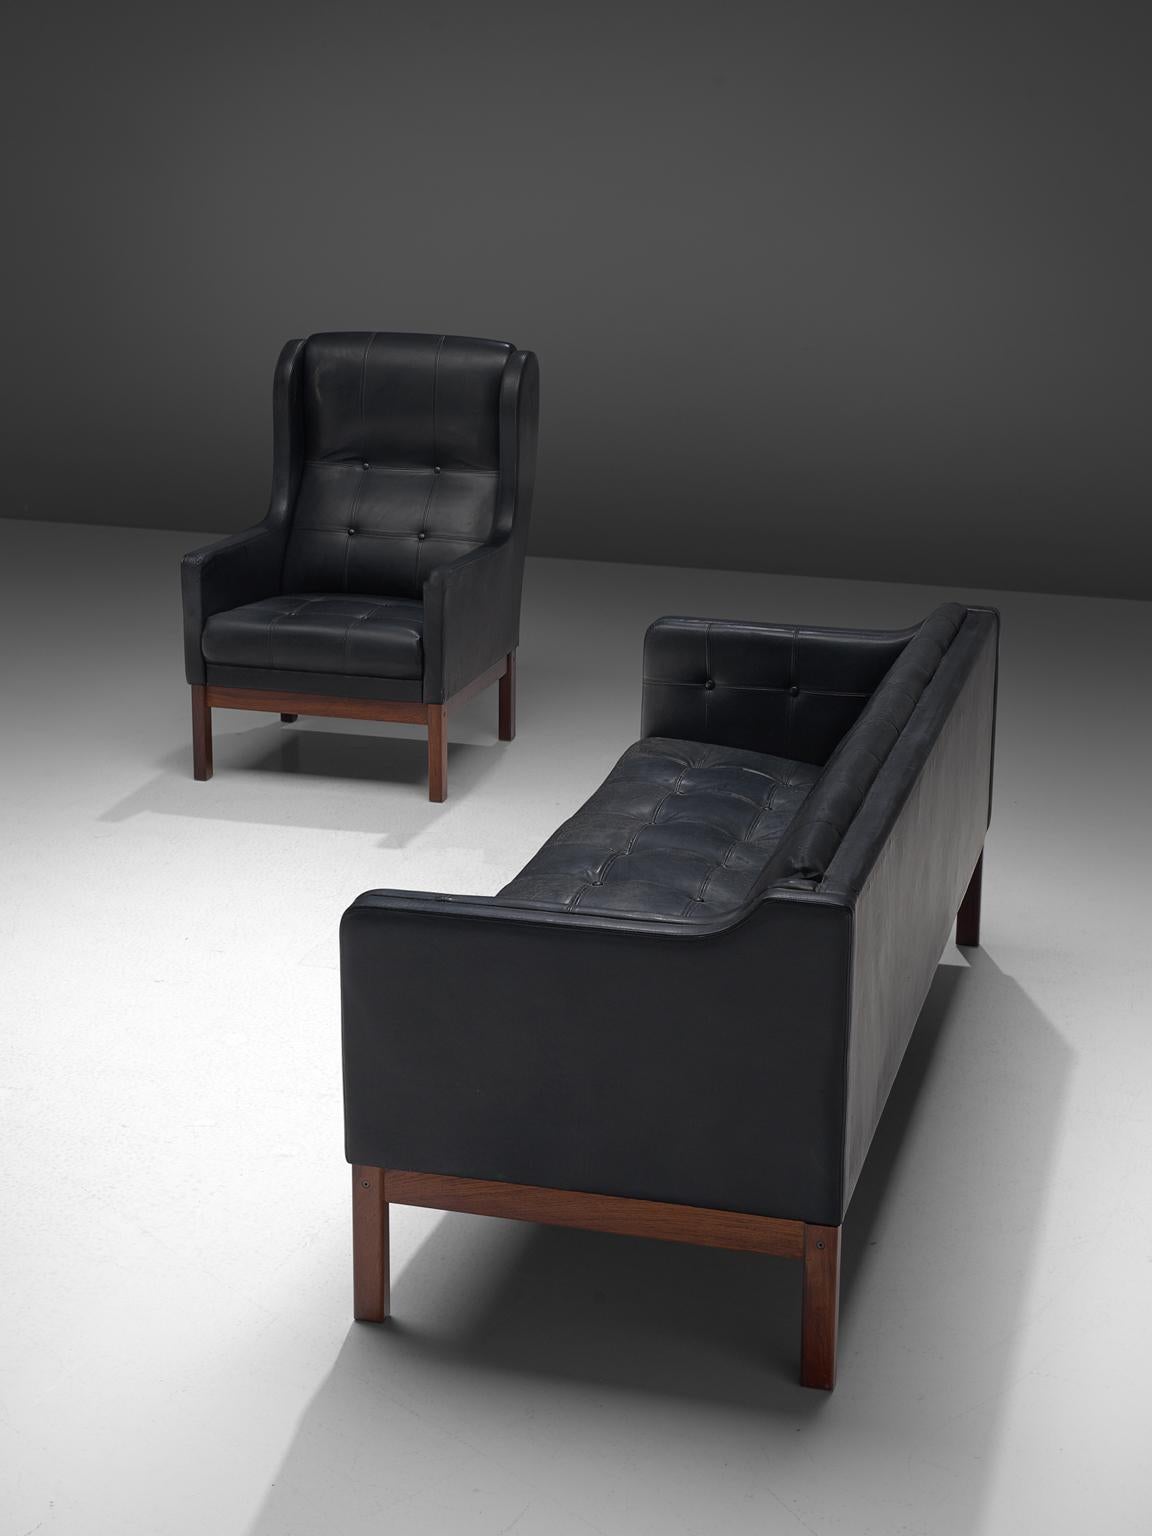 Pastoe, living room set, leather and rosewood, Denmark, 1960s

Classic and decent living room set manufactured by Pastoe in the 1960s. The set consists of a lounge chair and a three-seat sofa. The rosewood frame holds a black leather buttoned